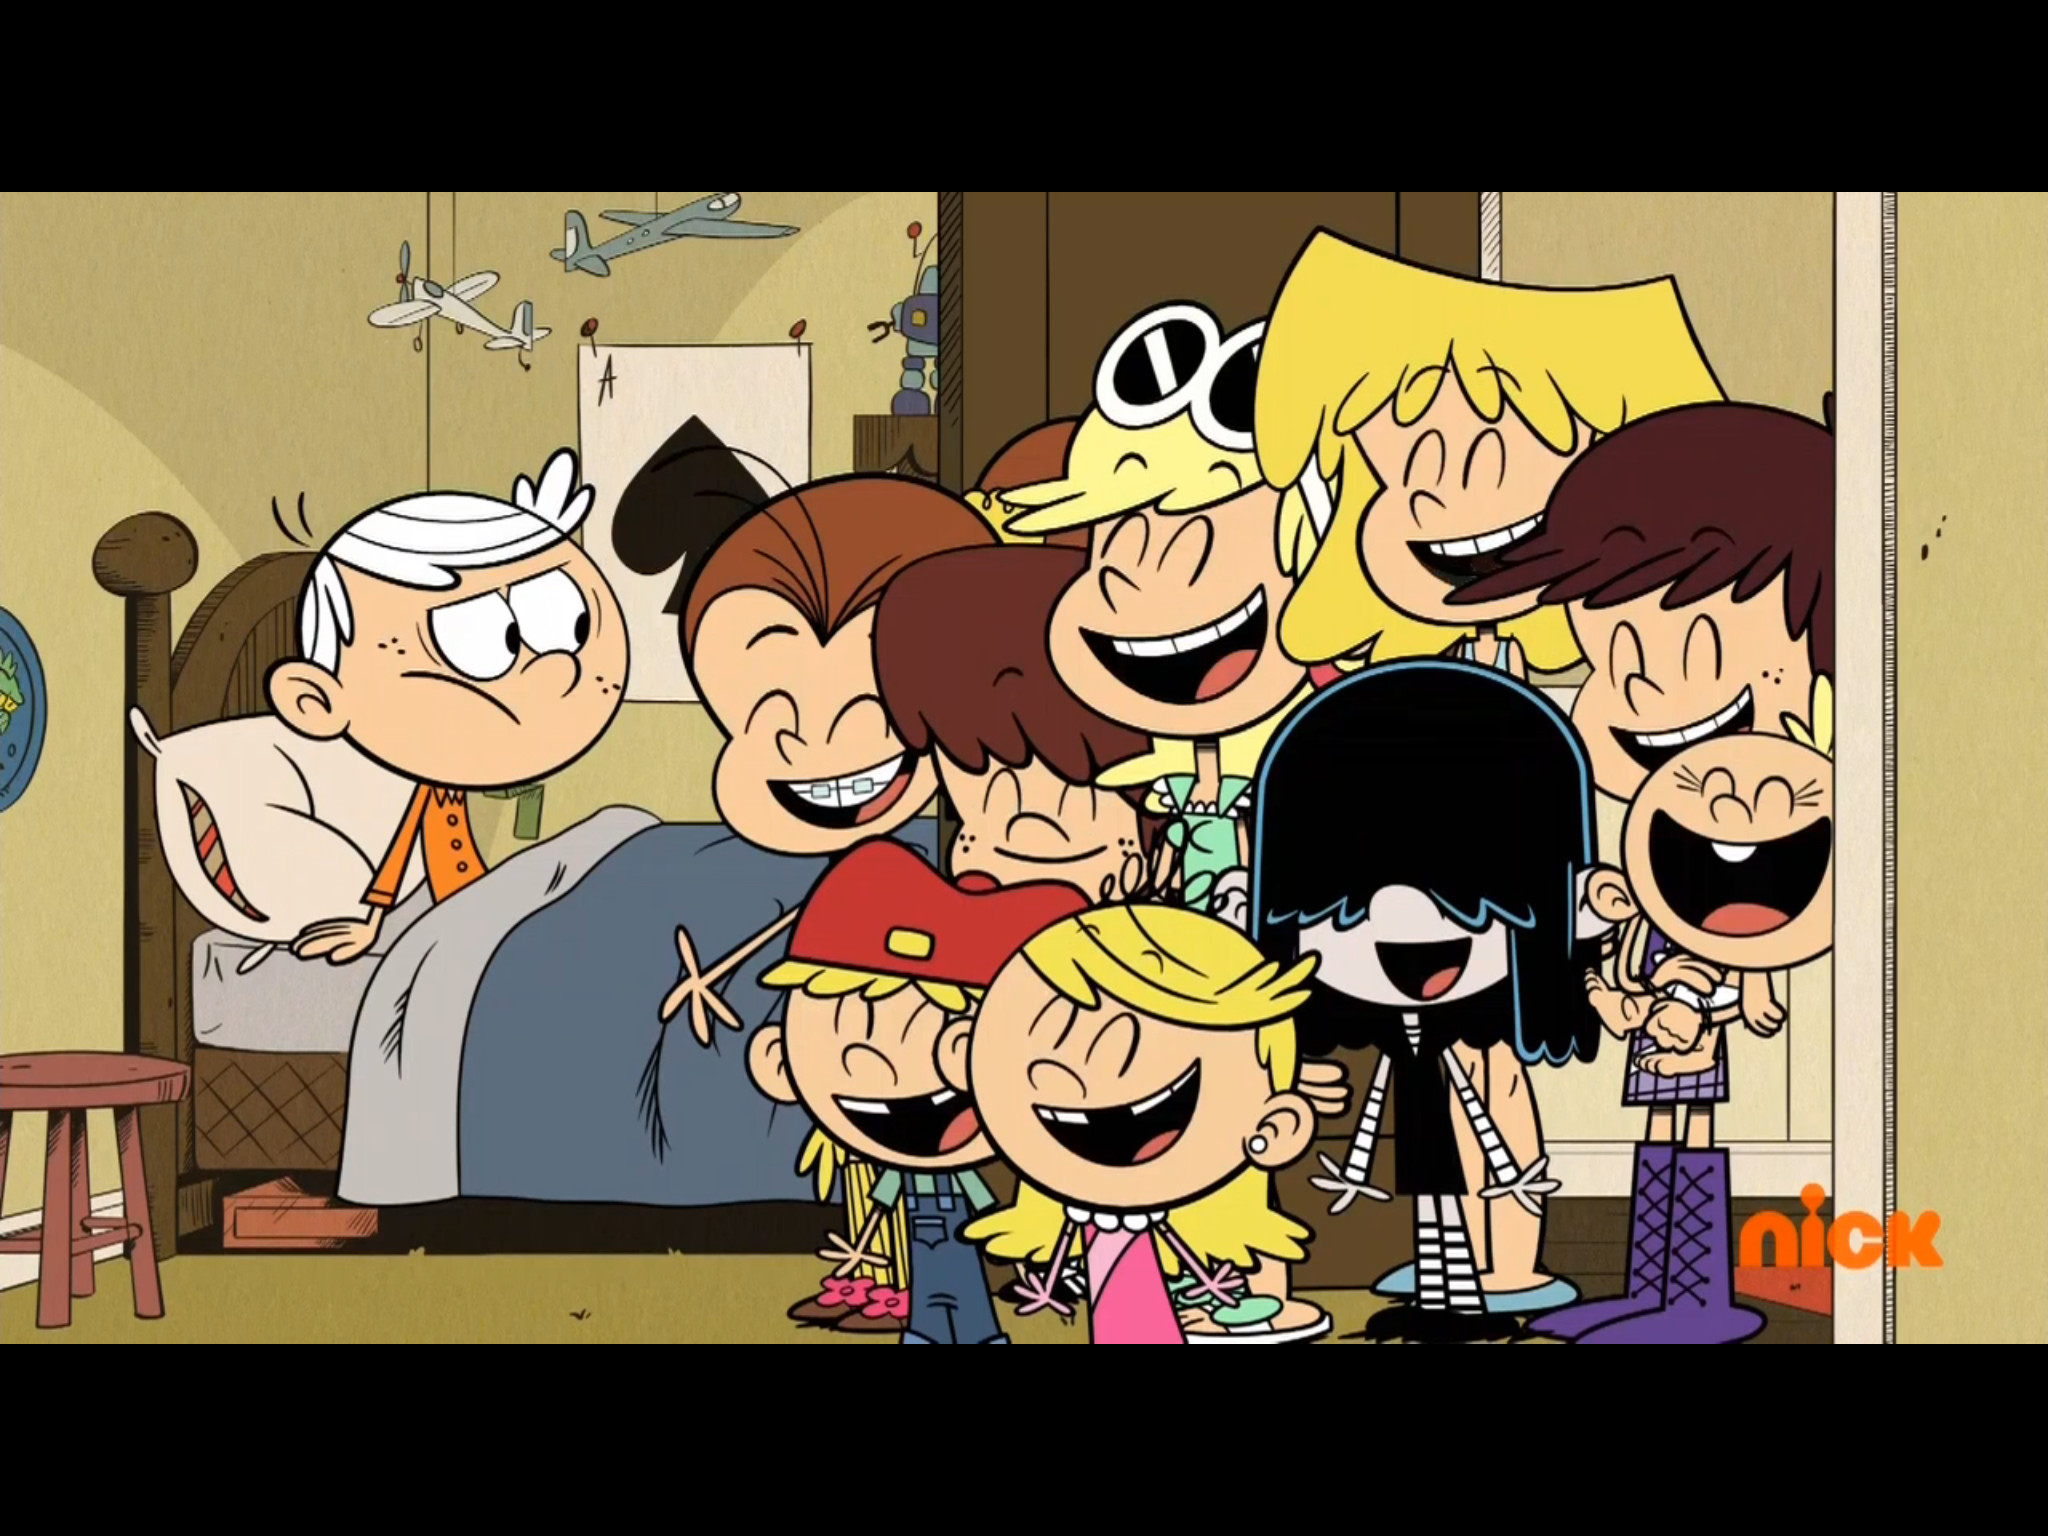 2048x1536 The Loud House images F6BBD8CF AAC6 4ECD 89C0 1F382E2C1452 HD wallpaper and  background photos